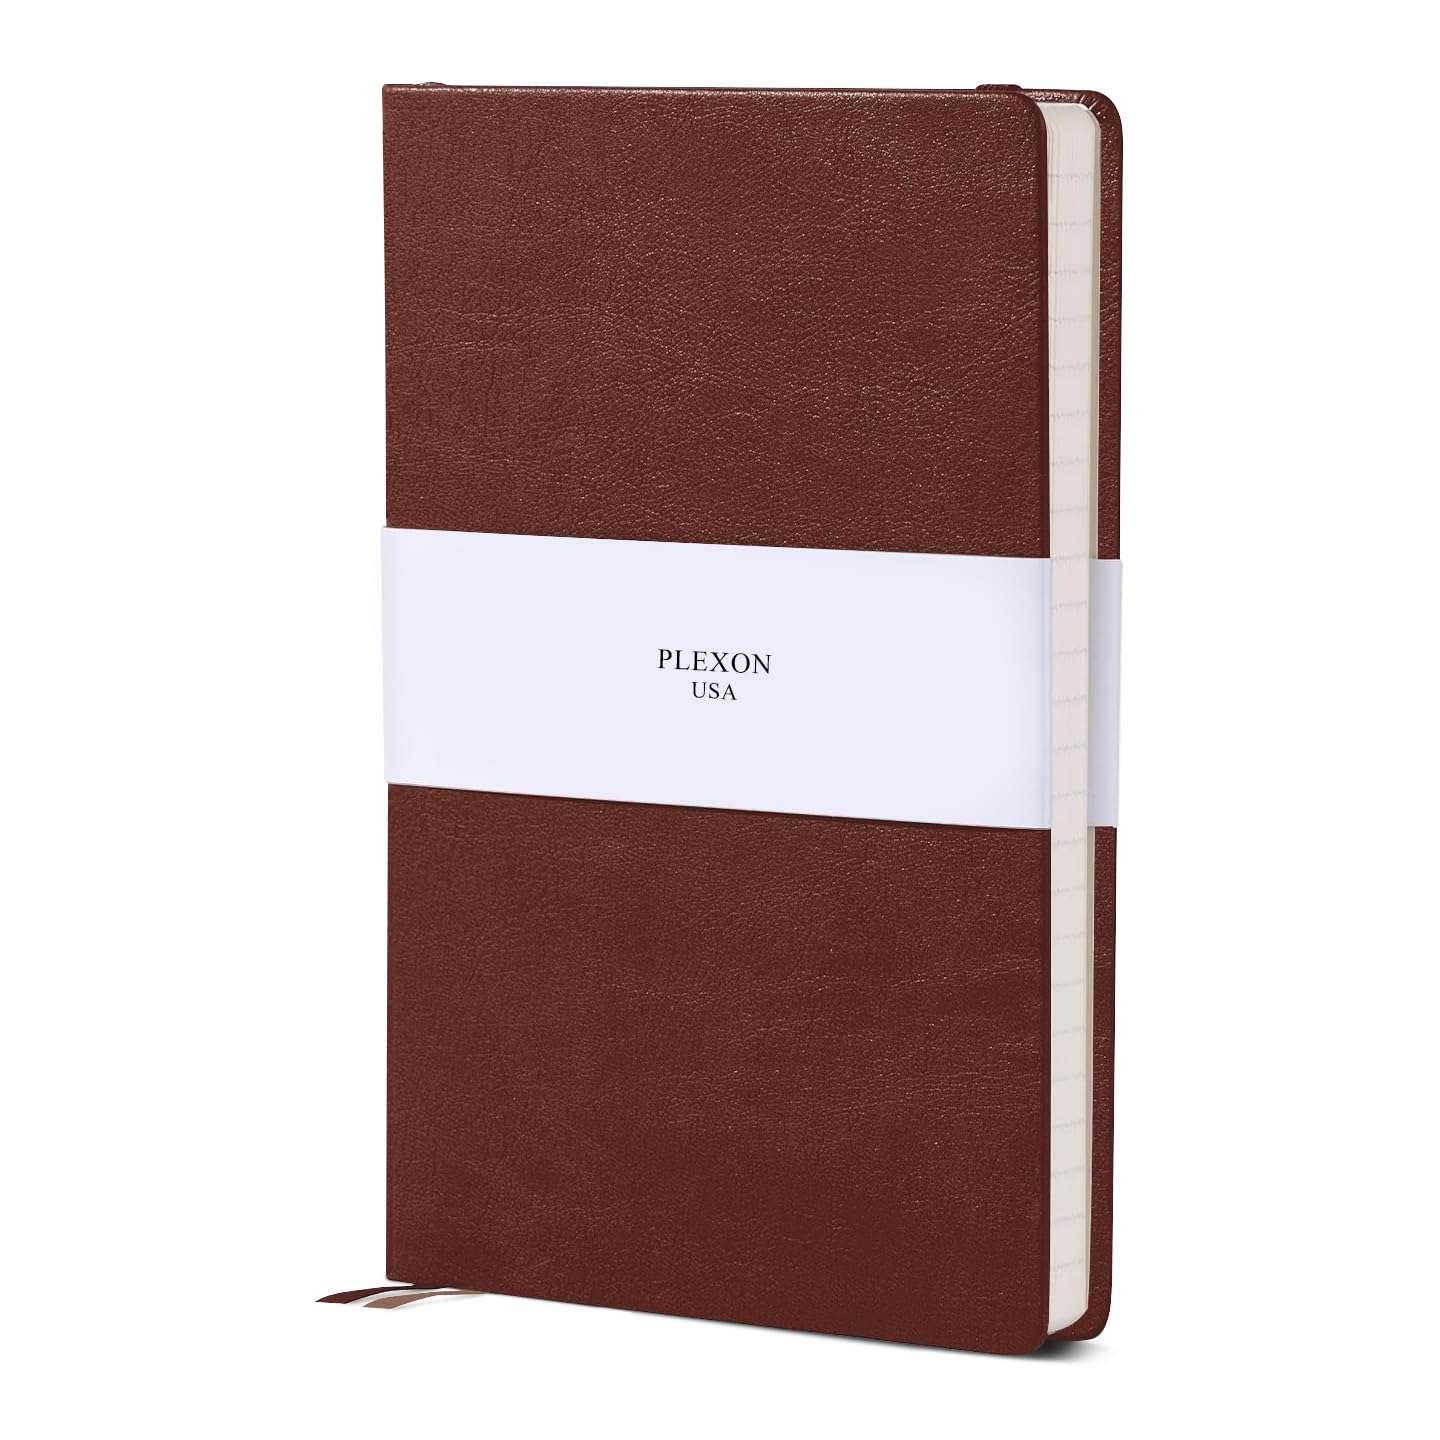 Chestnut Brown A5 Hardcover Vegan Leather Squared Notebook with 120 gsm Graph Cream Paper and Gift Box, 80 Sheets - 6